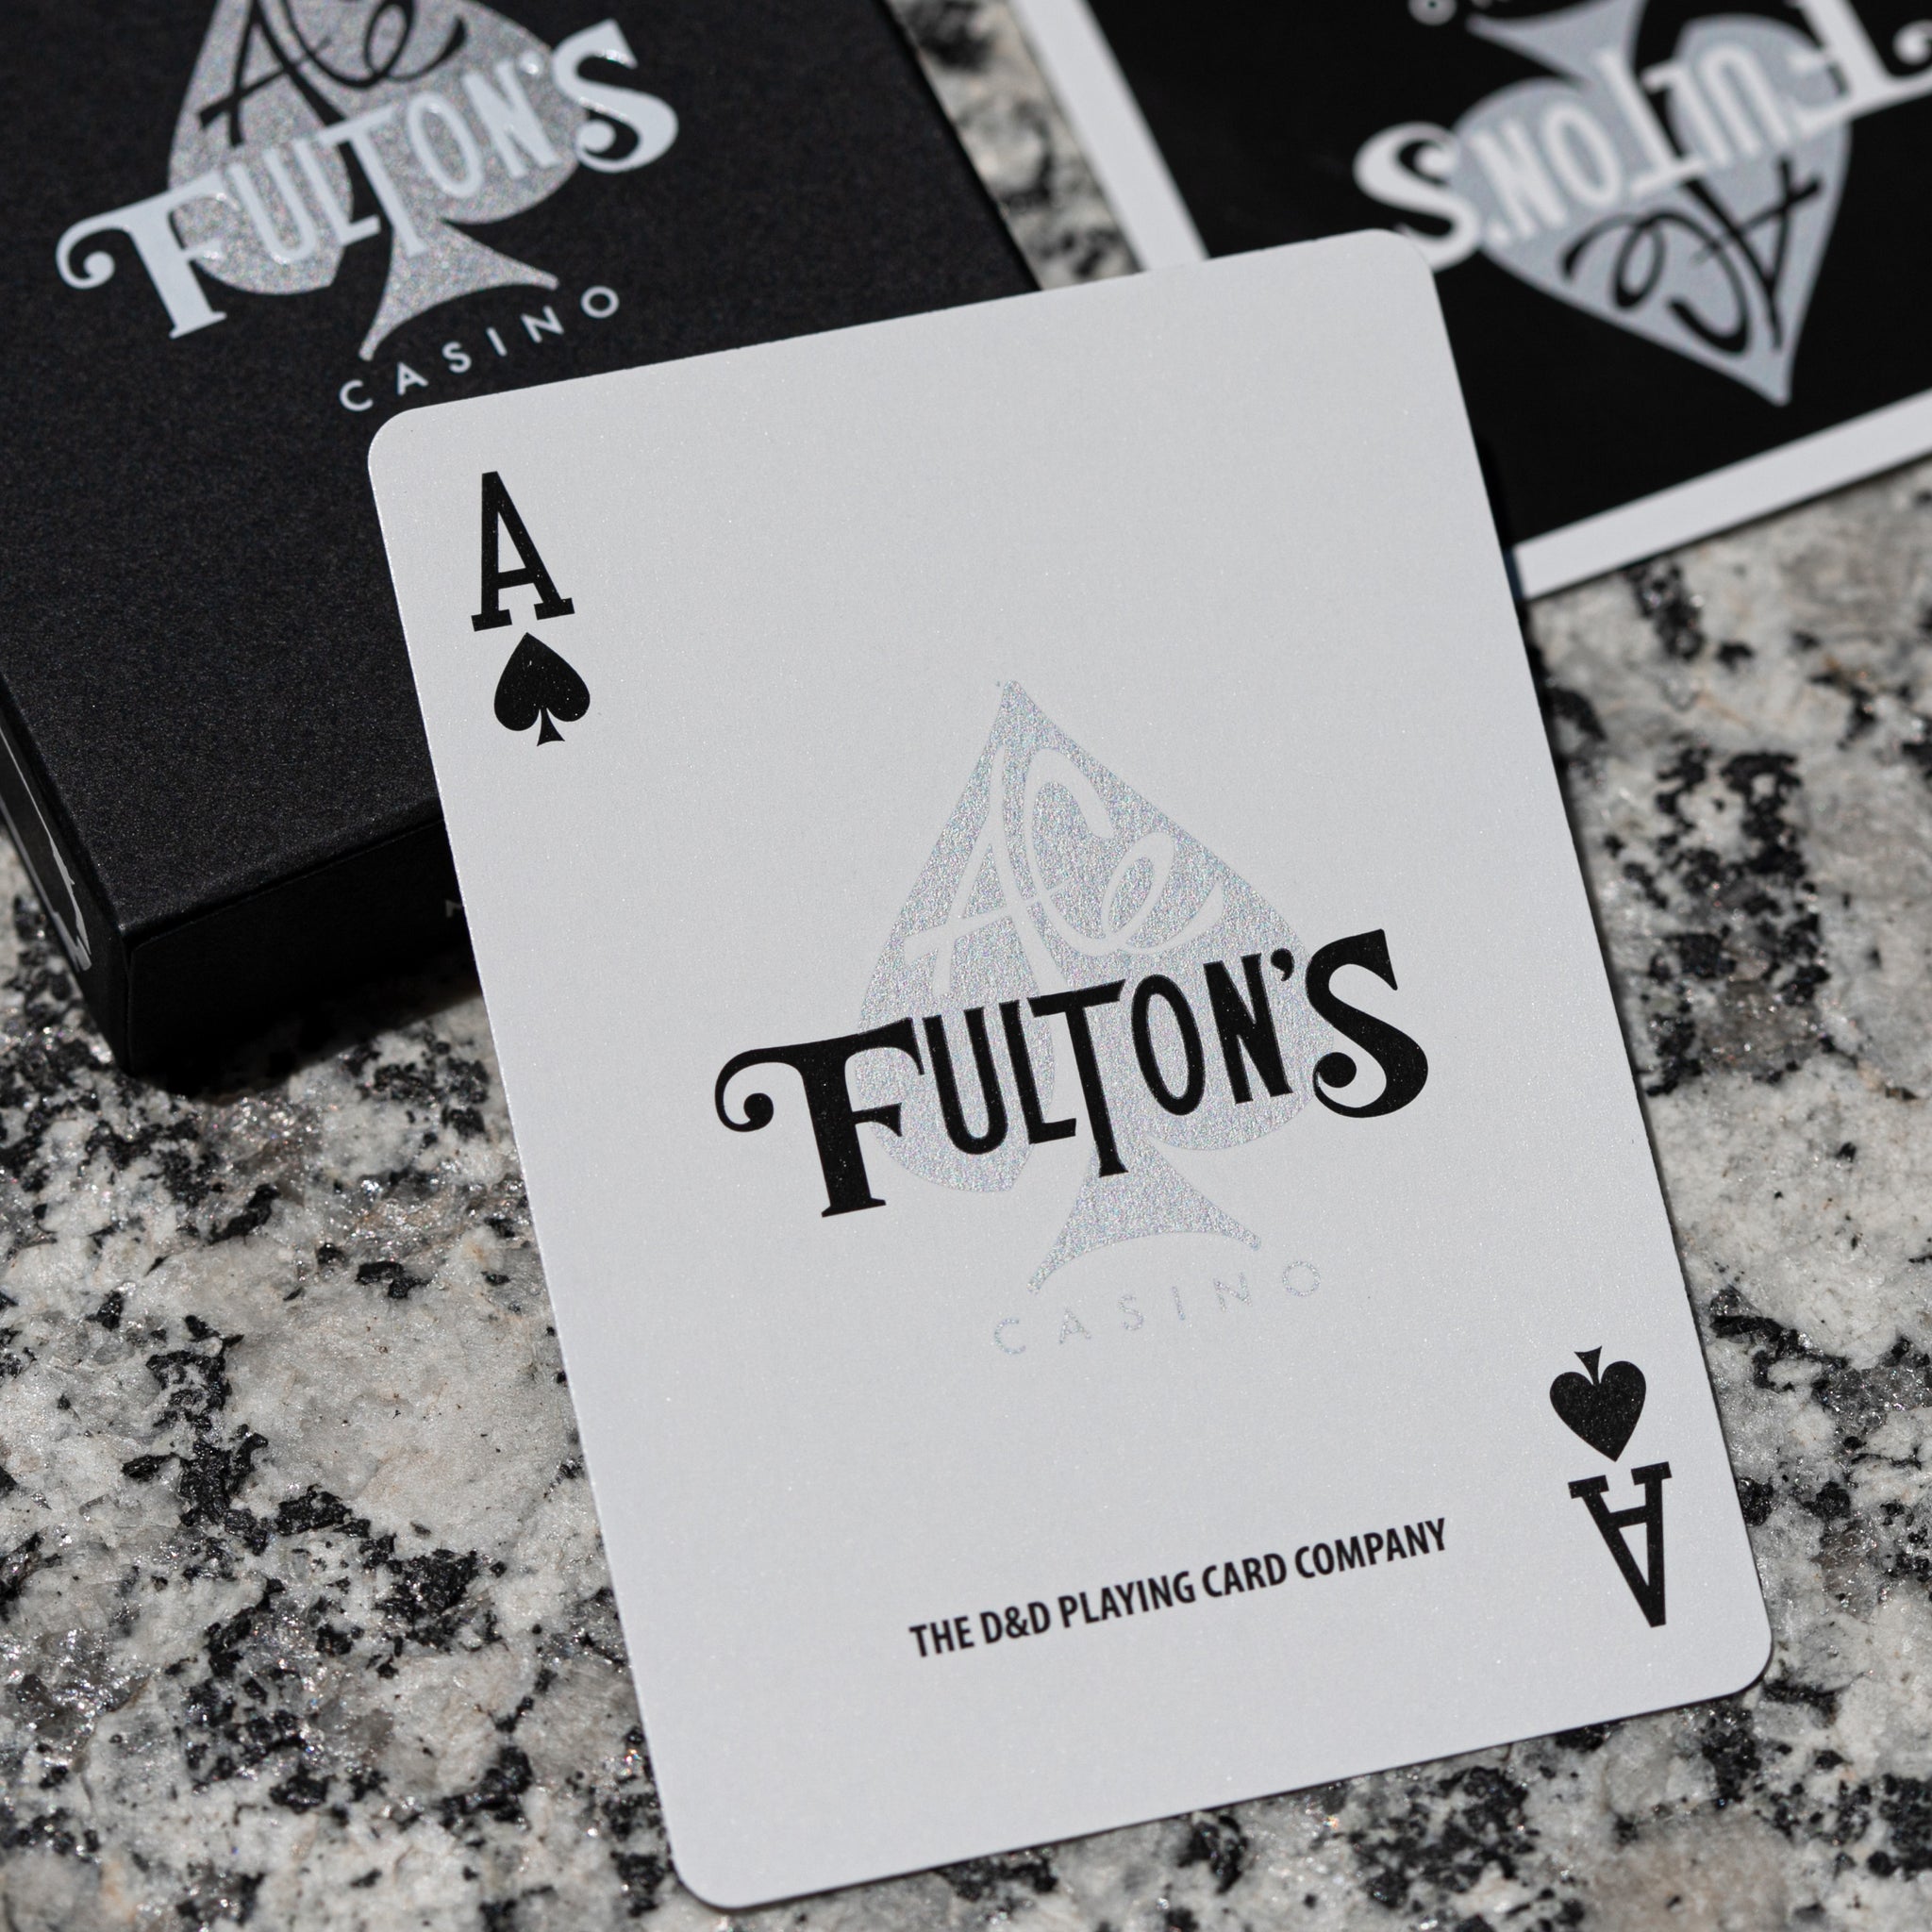 10 Years of Ace Fulton's Playing Cards – DAN & DAVE